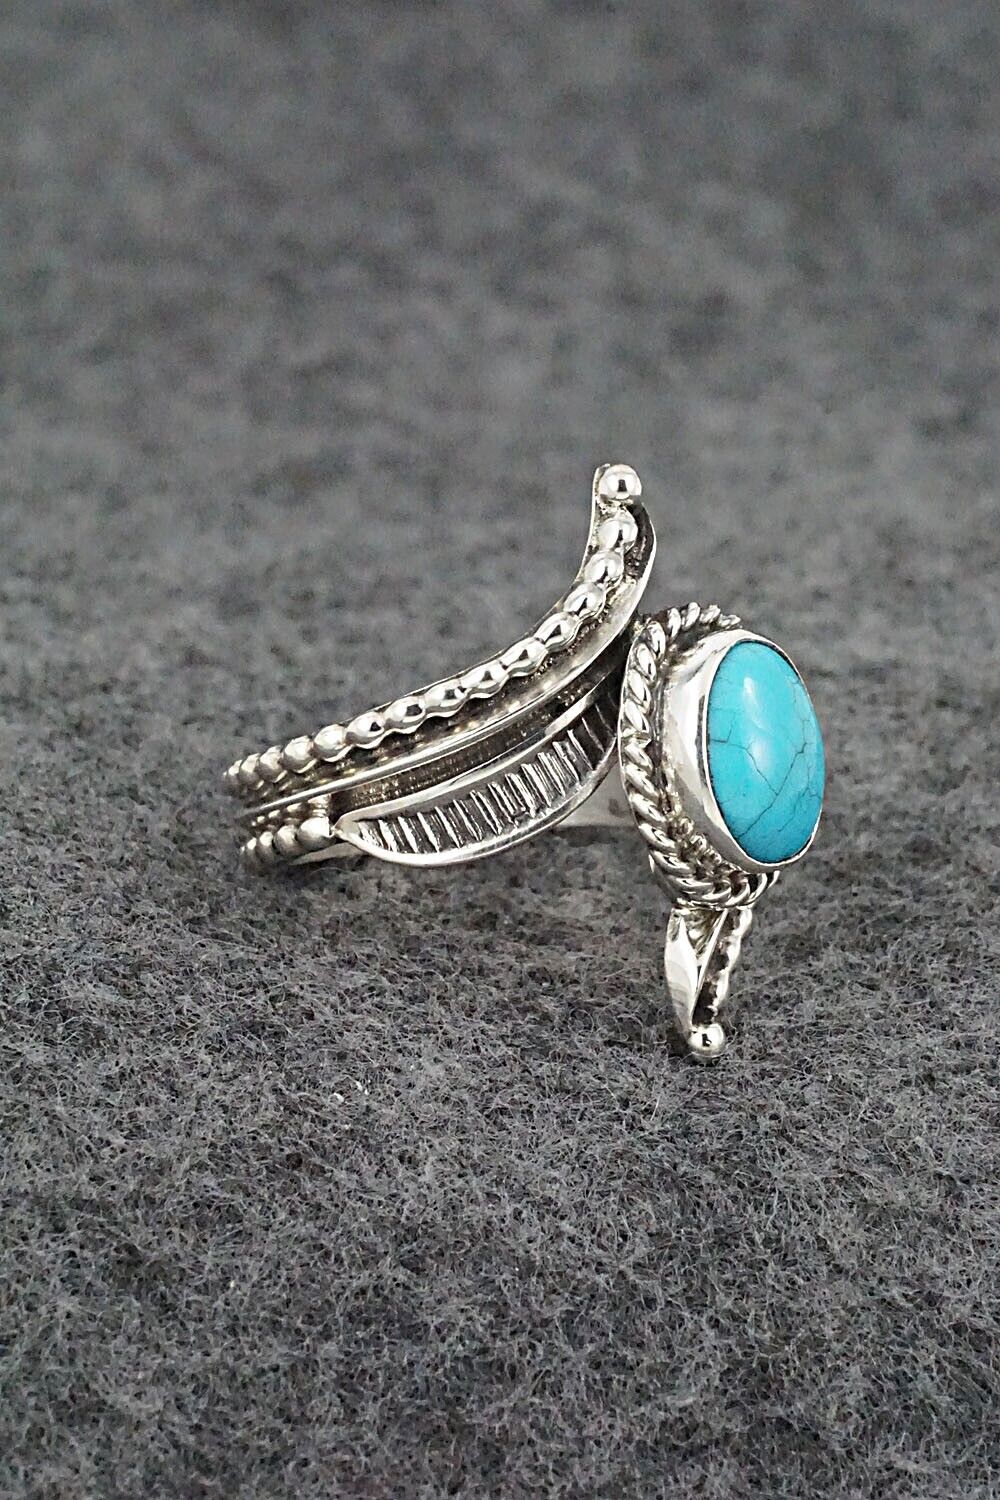 Turquoise & Sterling Silver Ring - Thomas Yazzie - Size 8